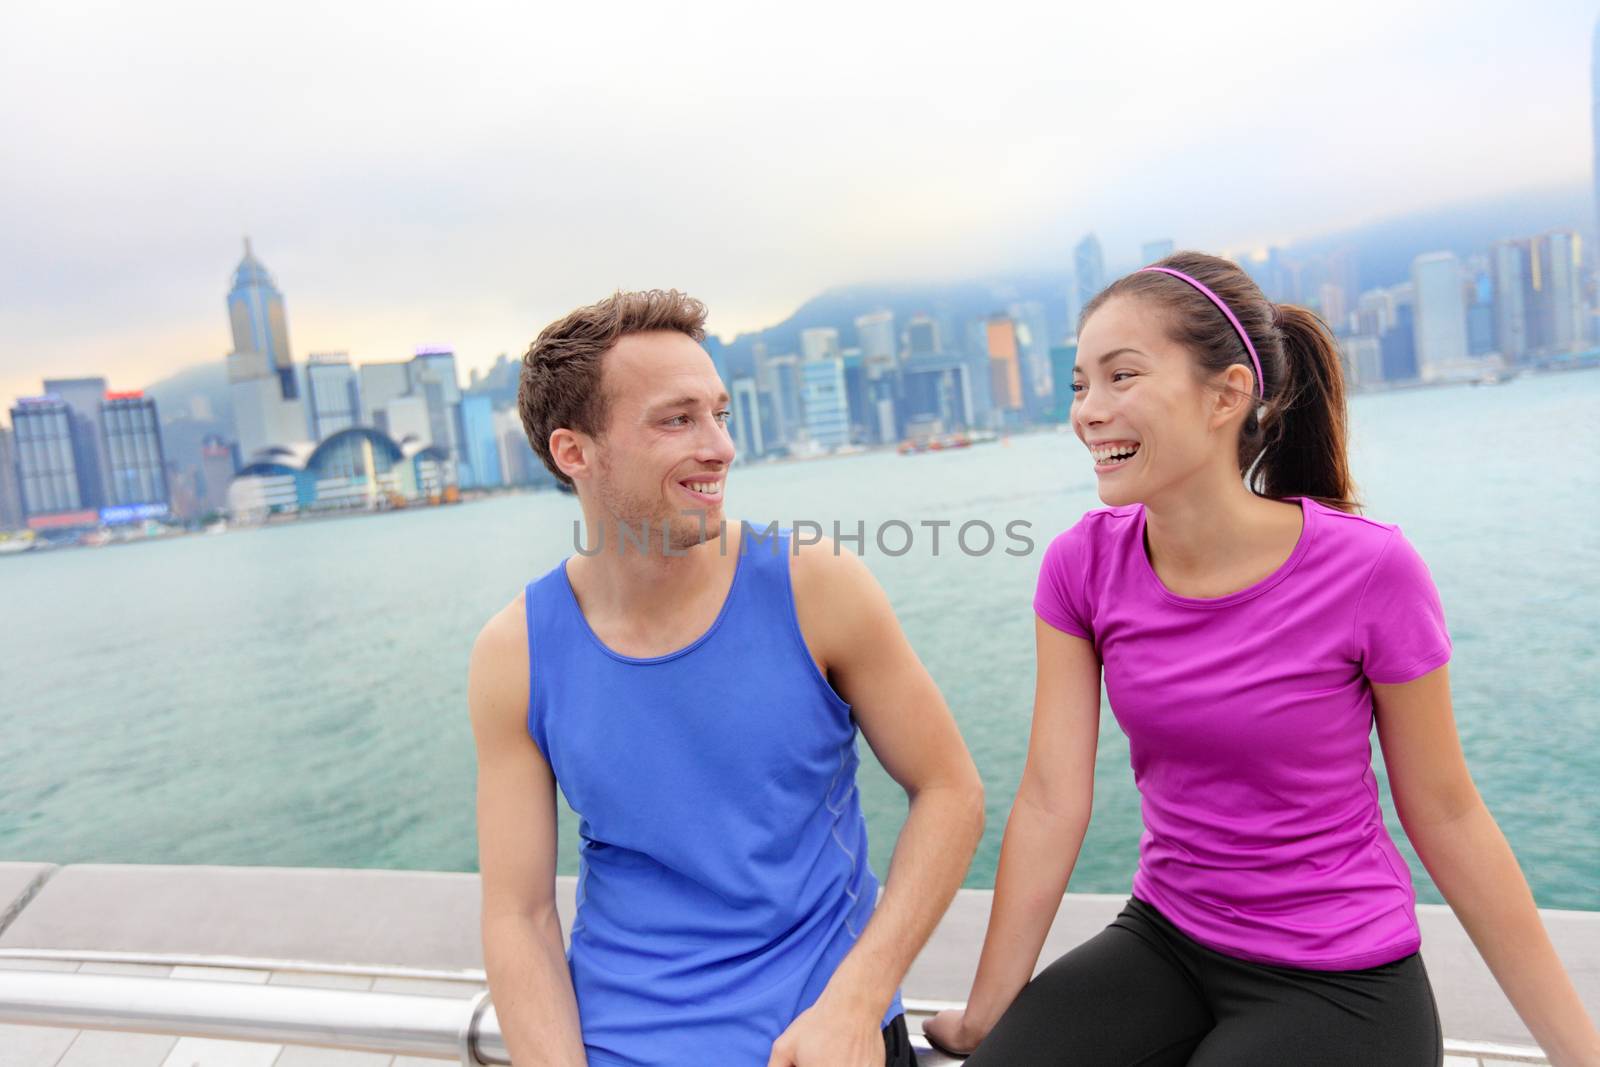 Runners relaxing after workout in Hong Kong city. Running caucasian and asian man and woman post run taking a break talking together on the Avenue of the Stars in Victoria harbor, HongKong Skyline.